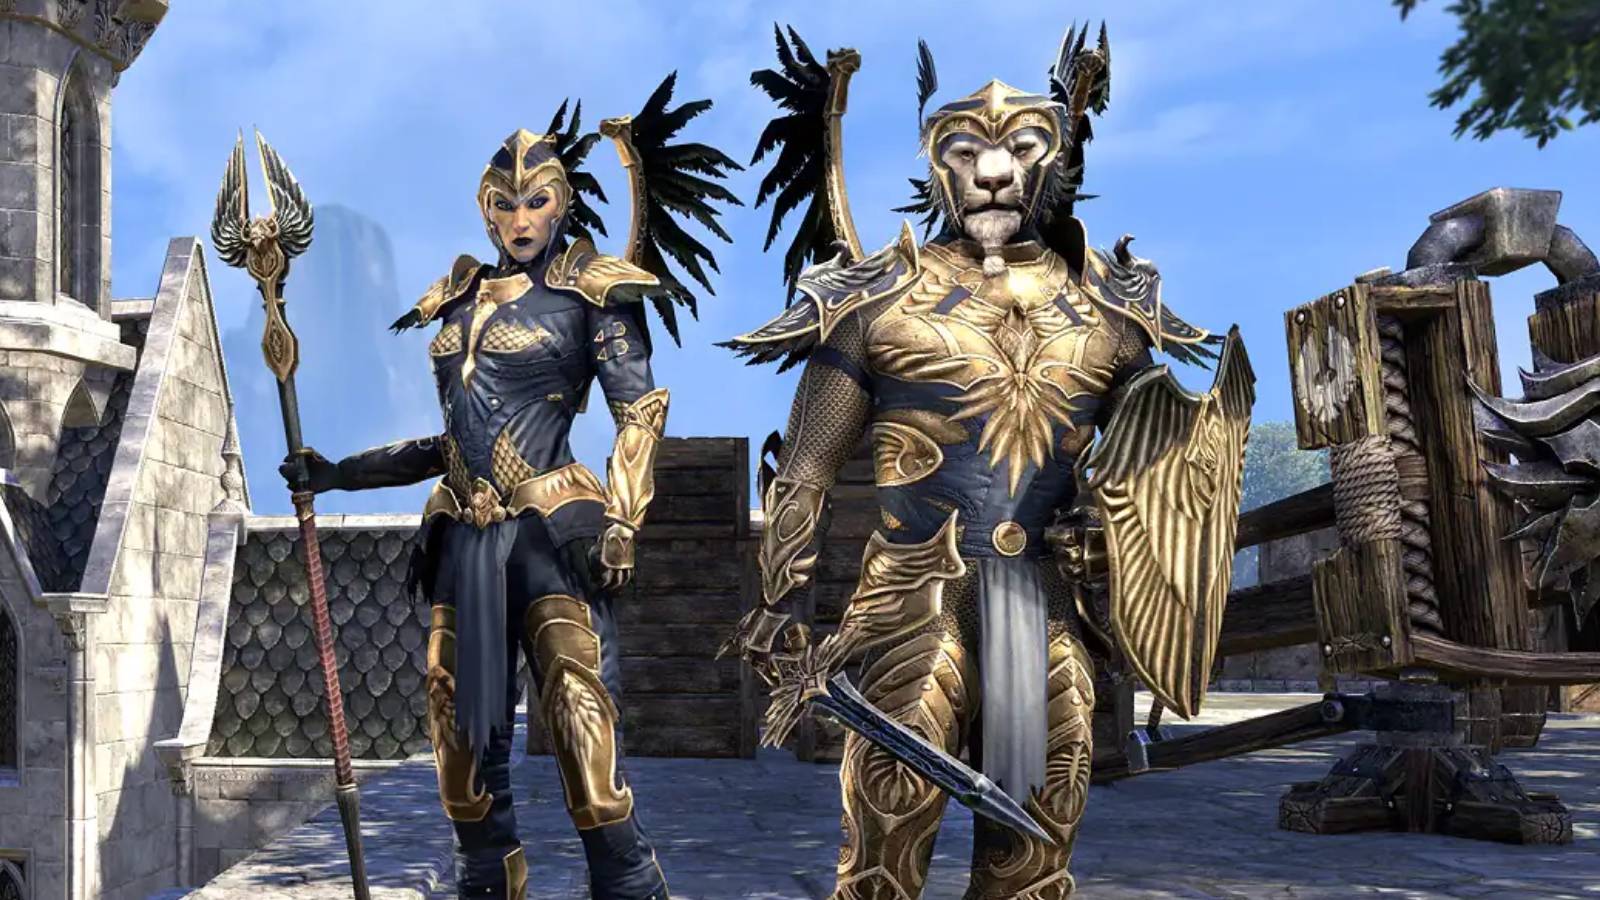 Update 35 PTS Patch Notes . . . We Were Right  The Elder Scrolls Online -  Lost Depths 